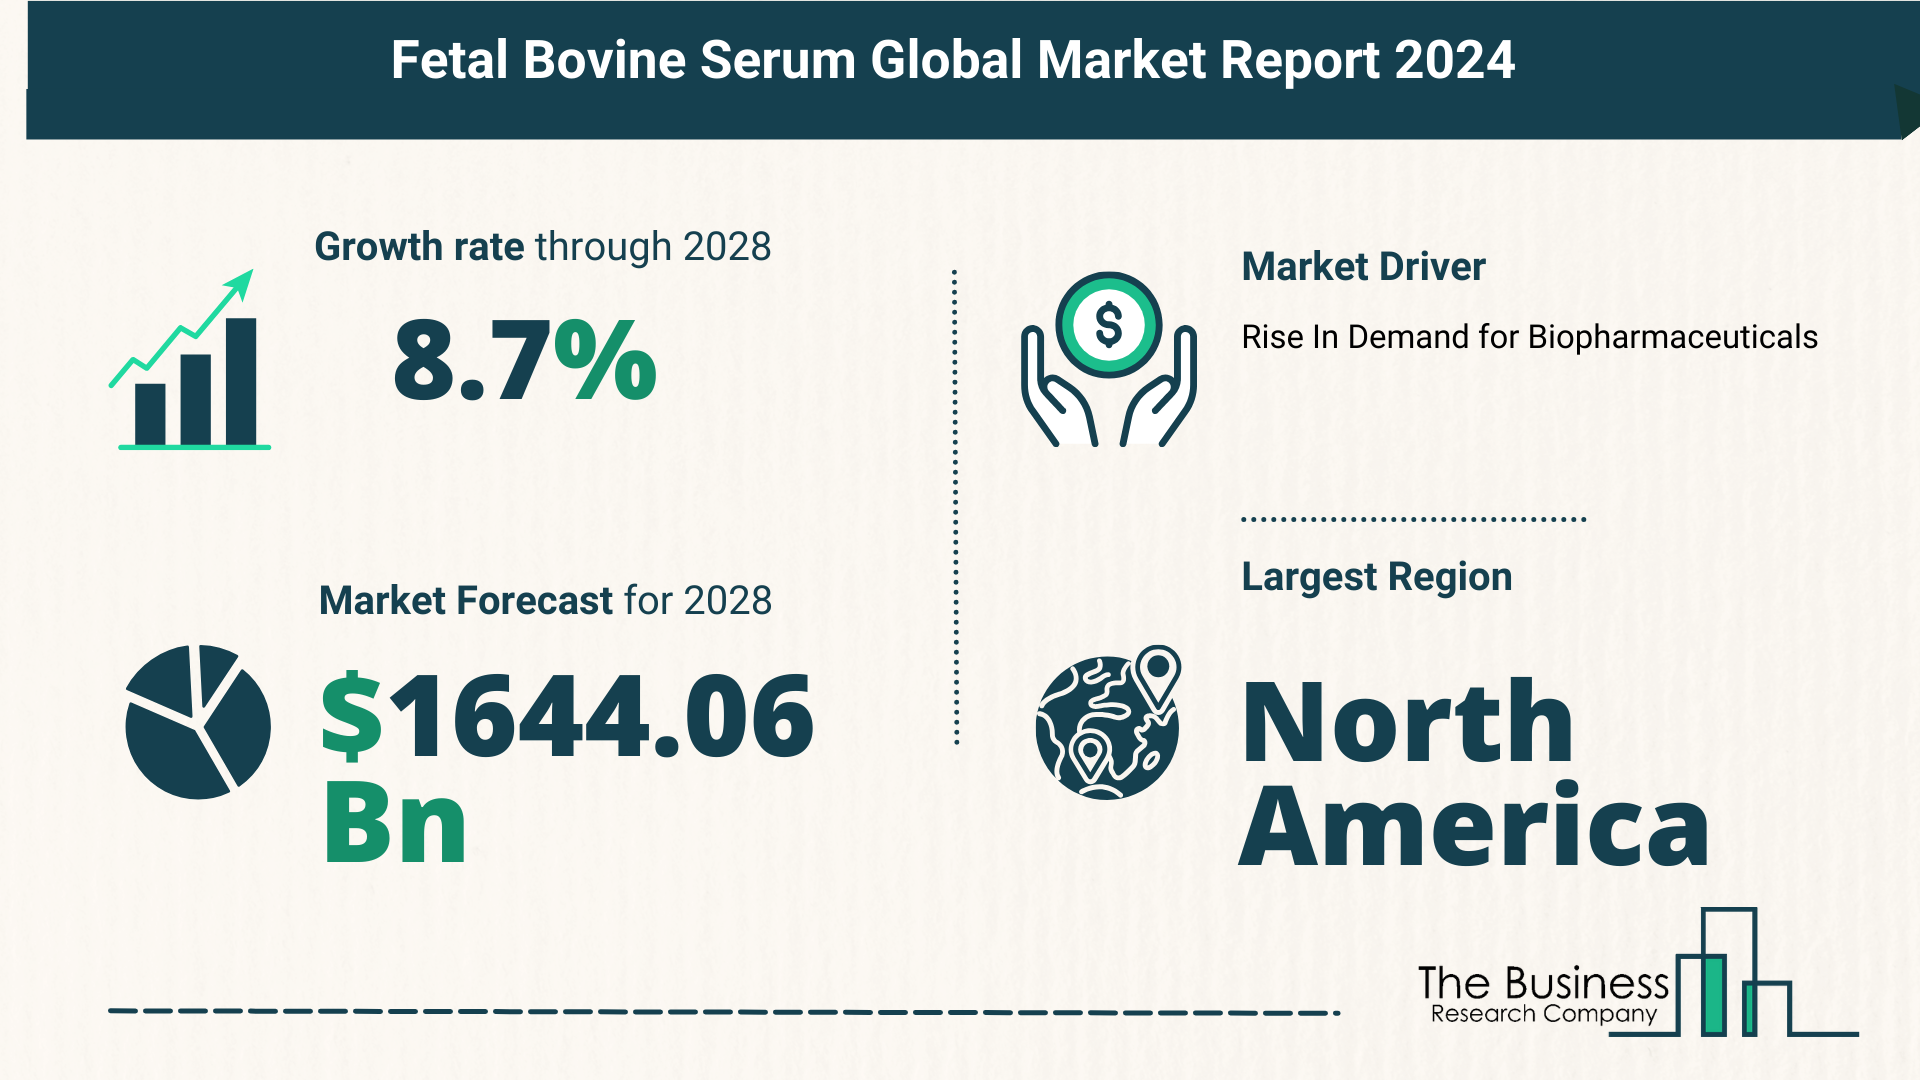 Top 5 Insights From The Fetal Bovine Serum Market Report 2024